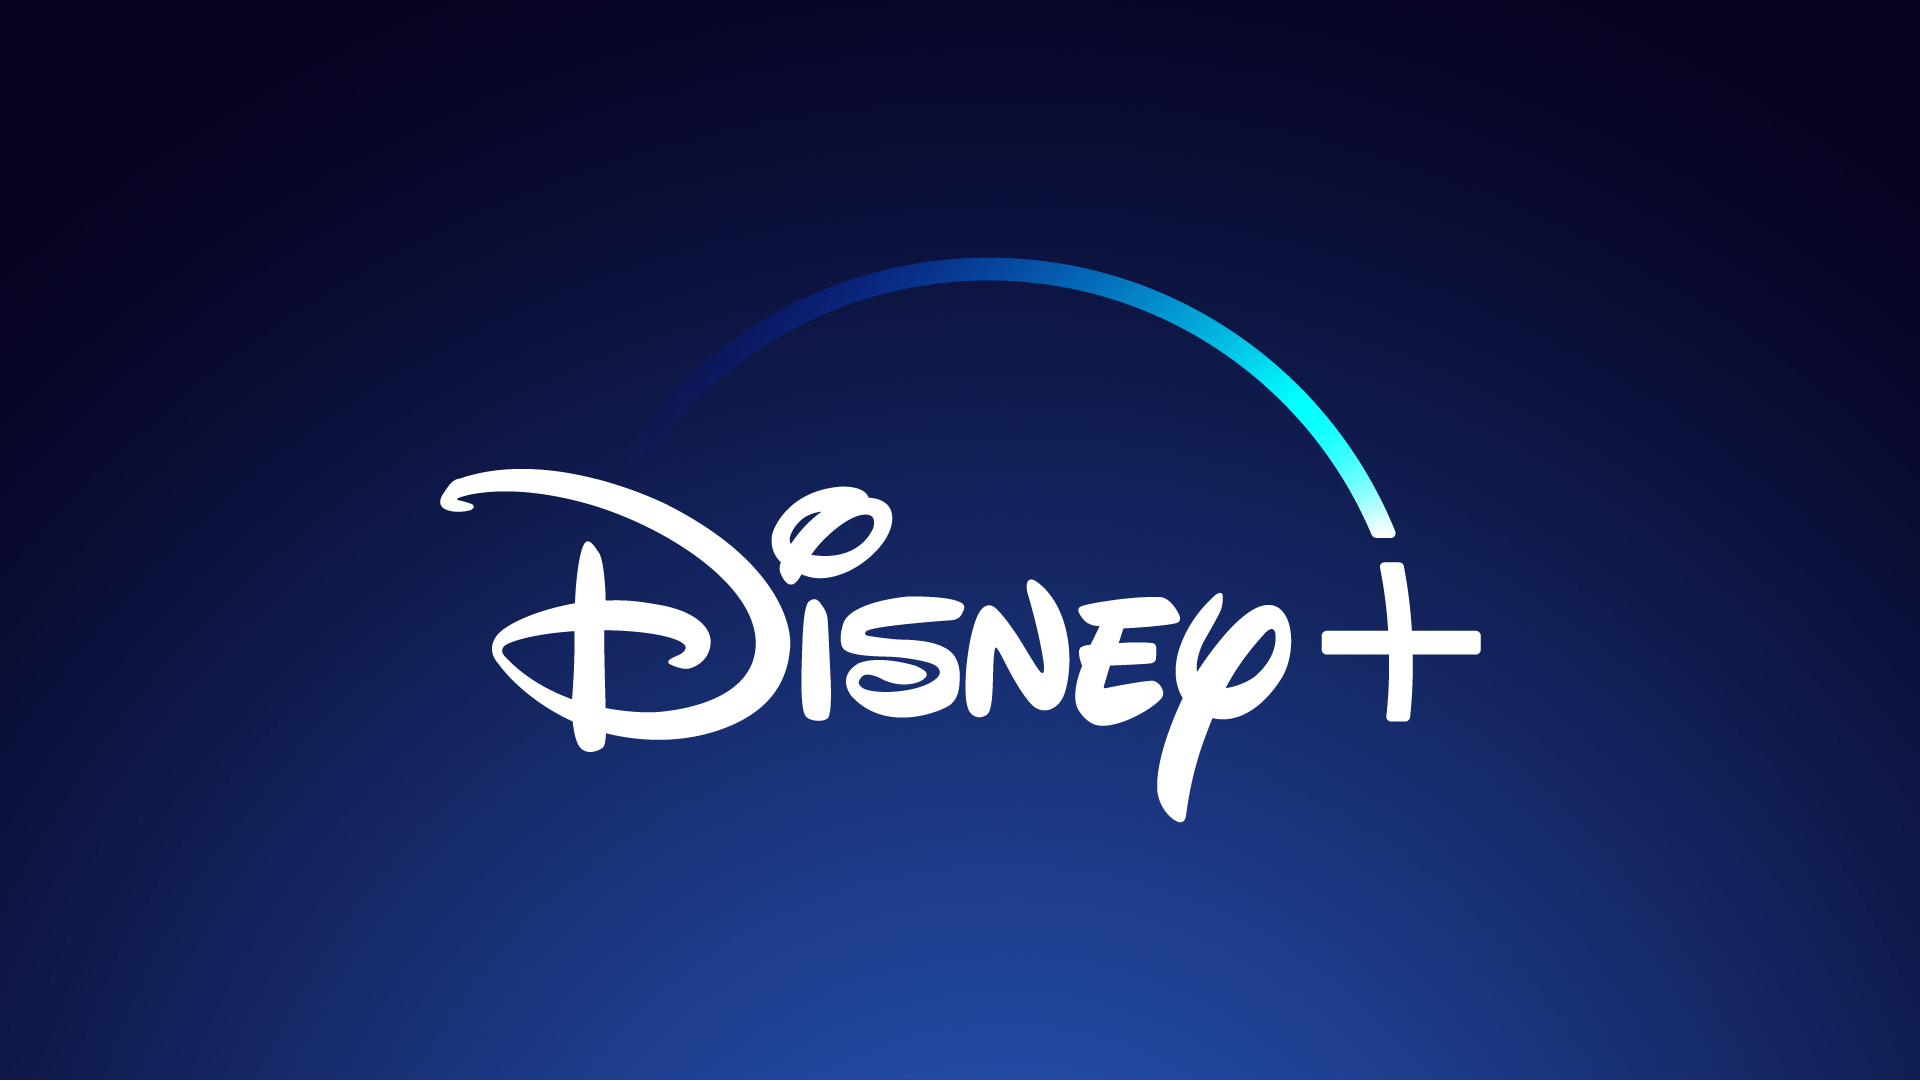 Disney+ Releases Earth Day Viewing Suggestions